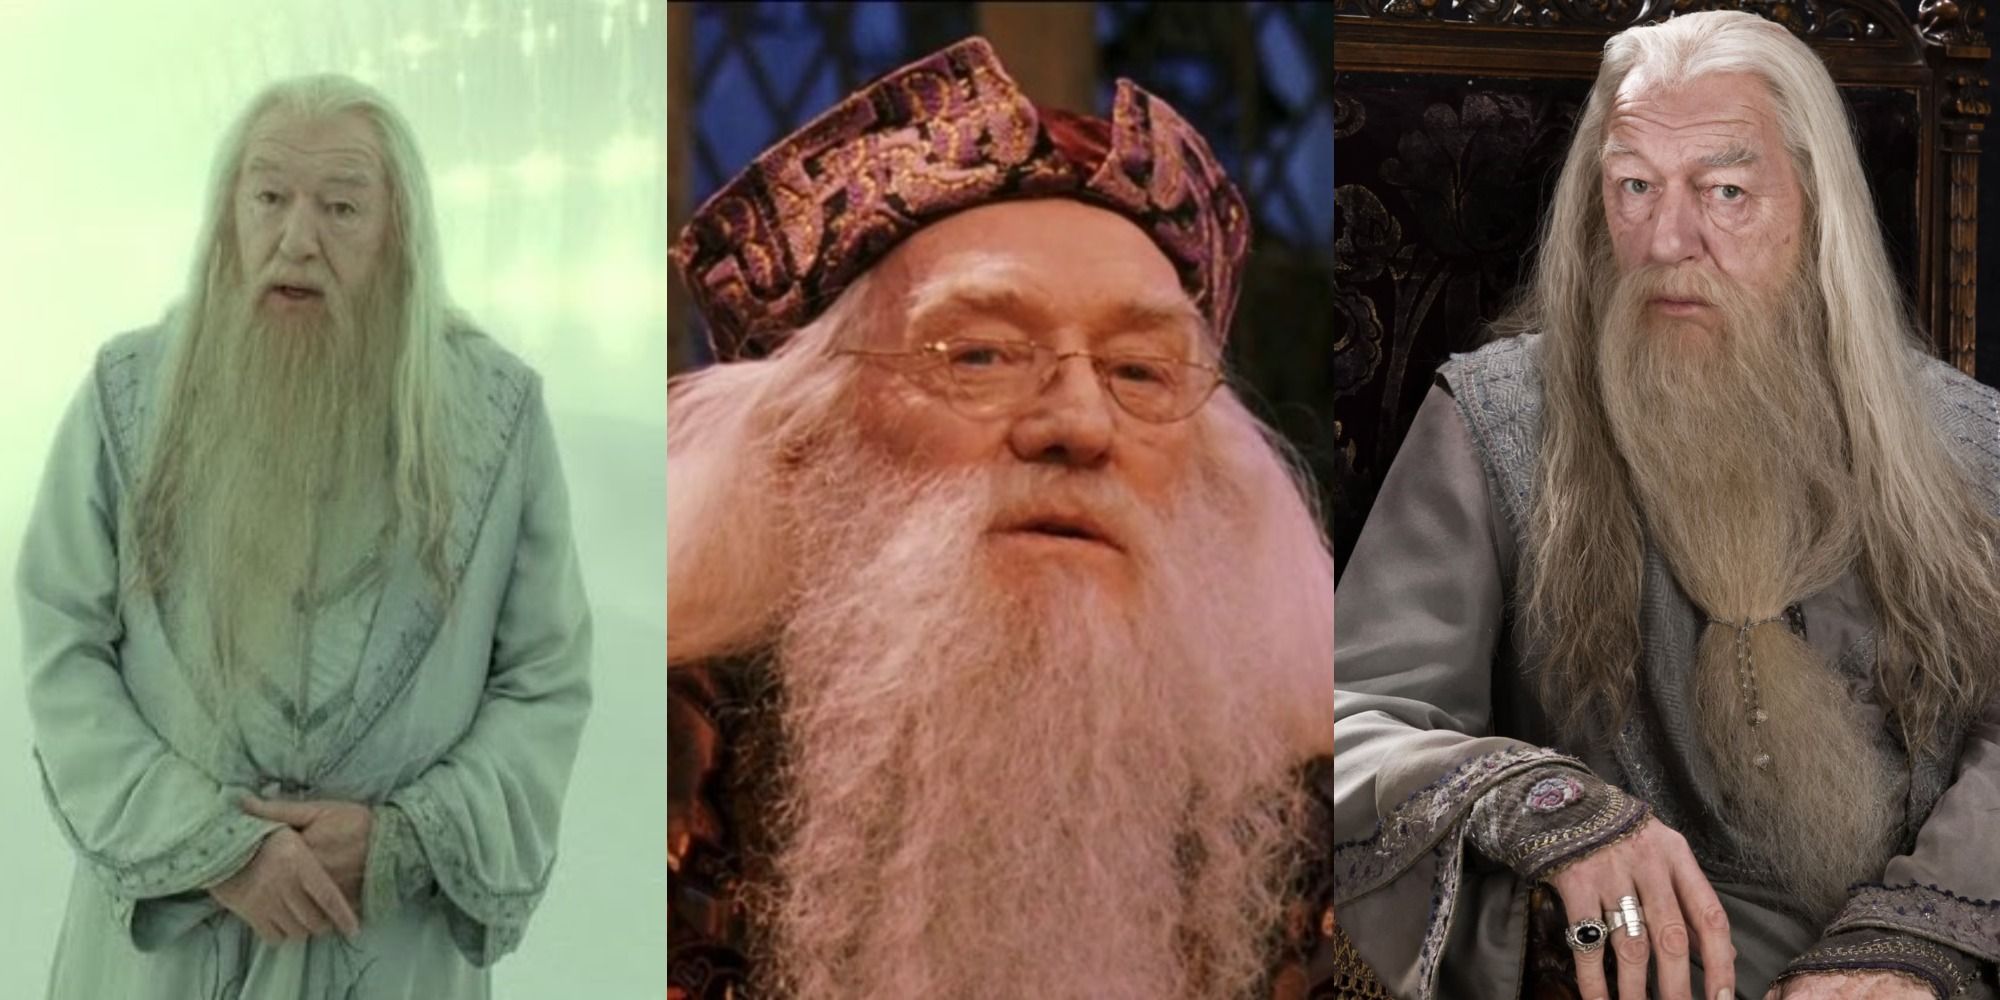 Three side by side images of Dumbledore from Harry Potter